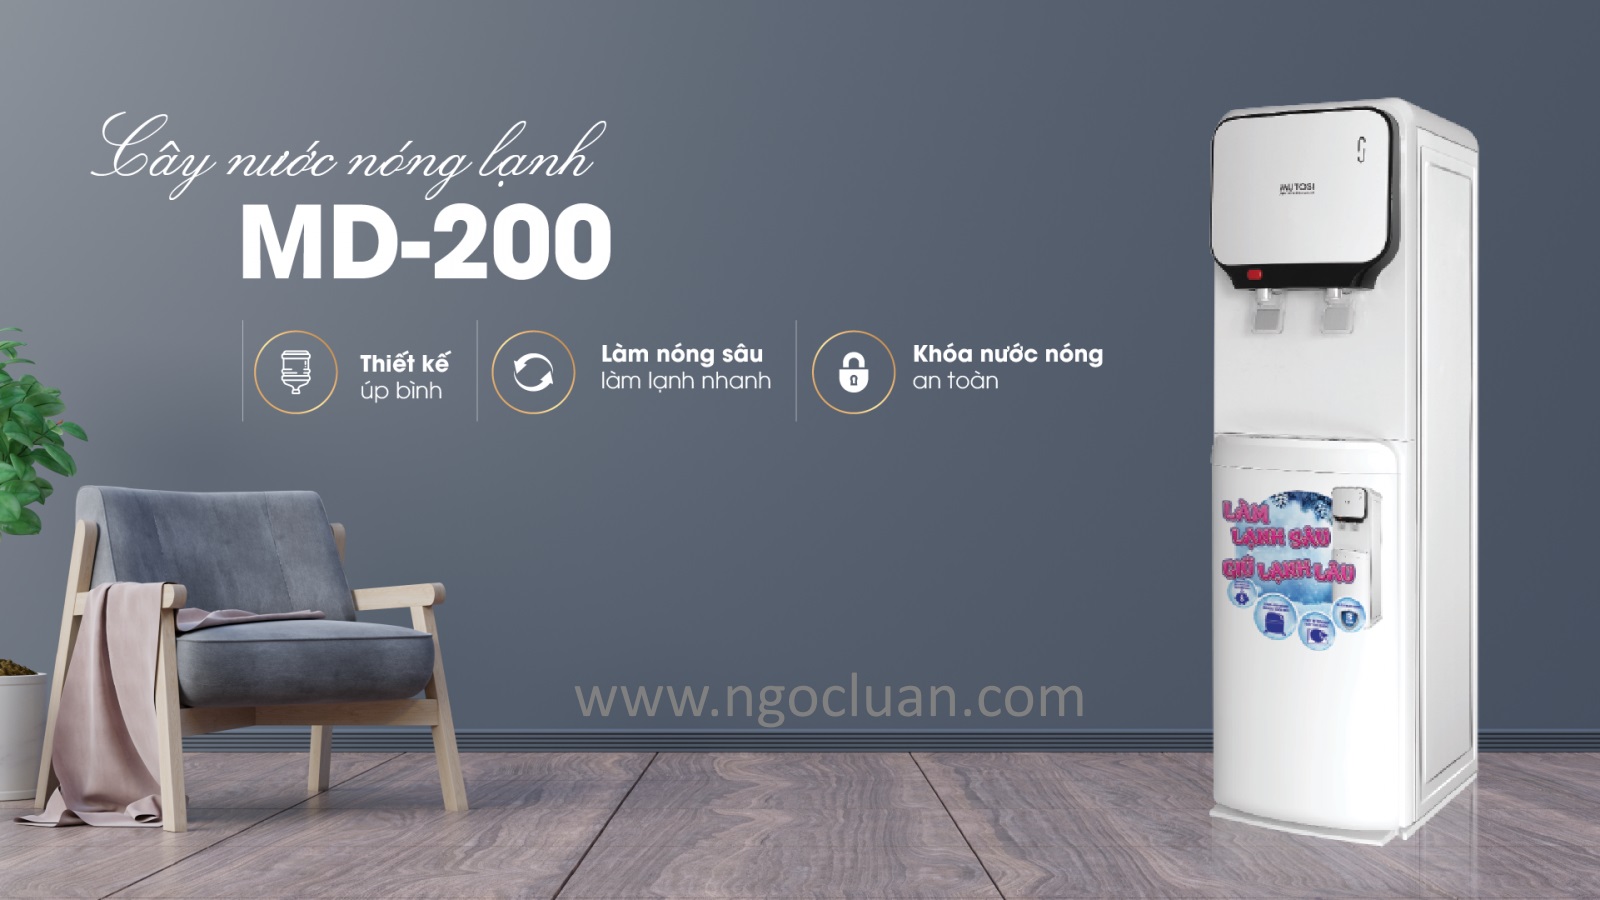 Cay nuoc nong lanh Mutosi md-200